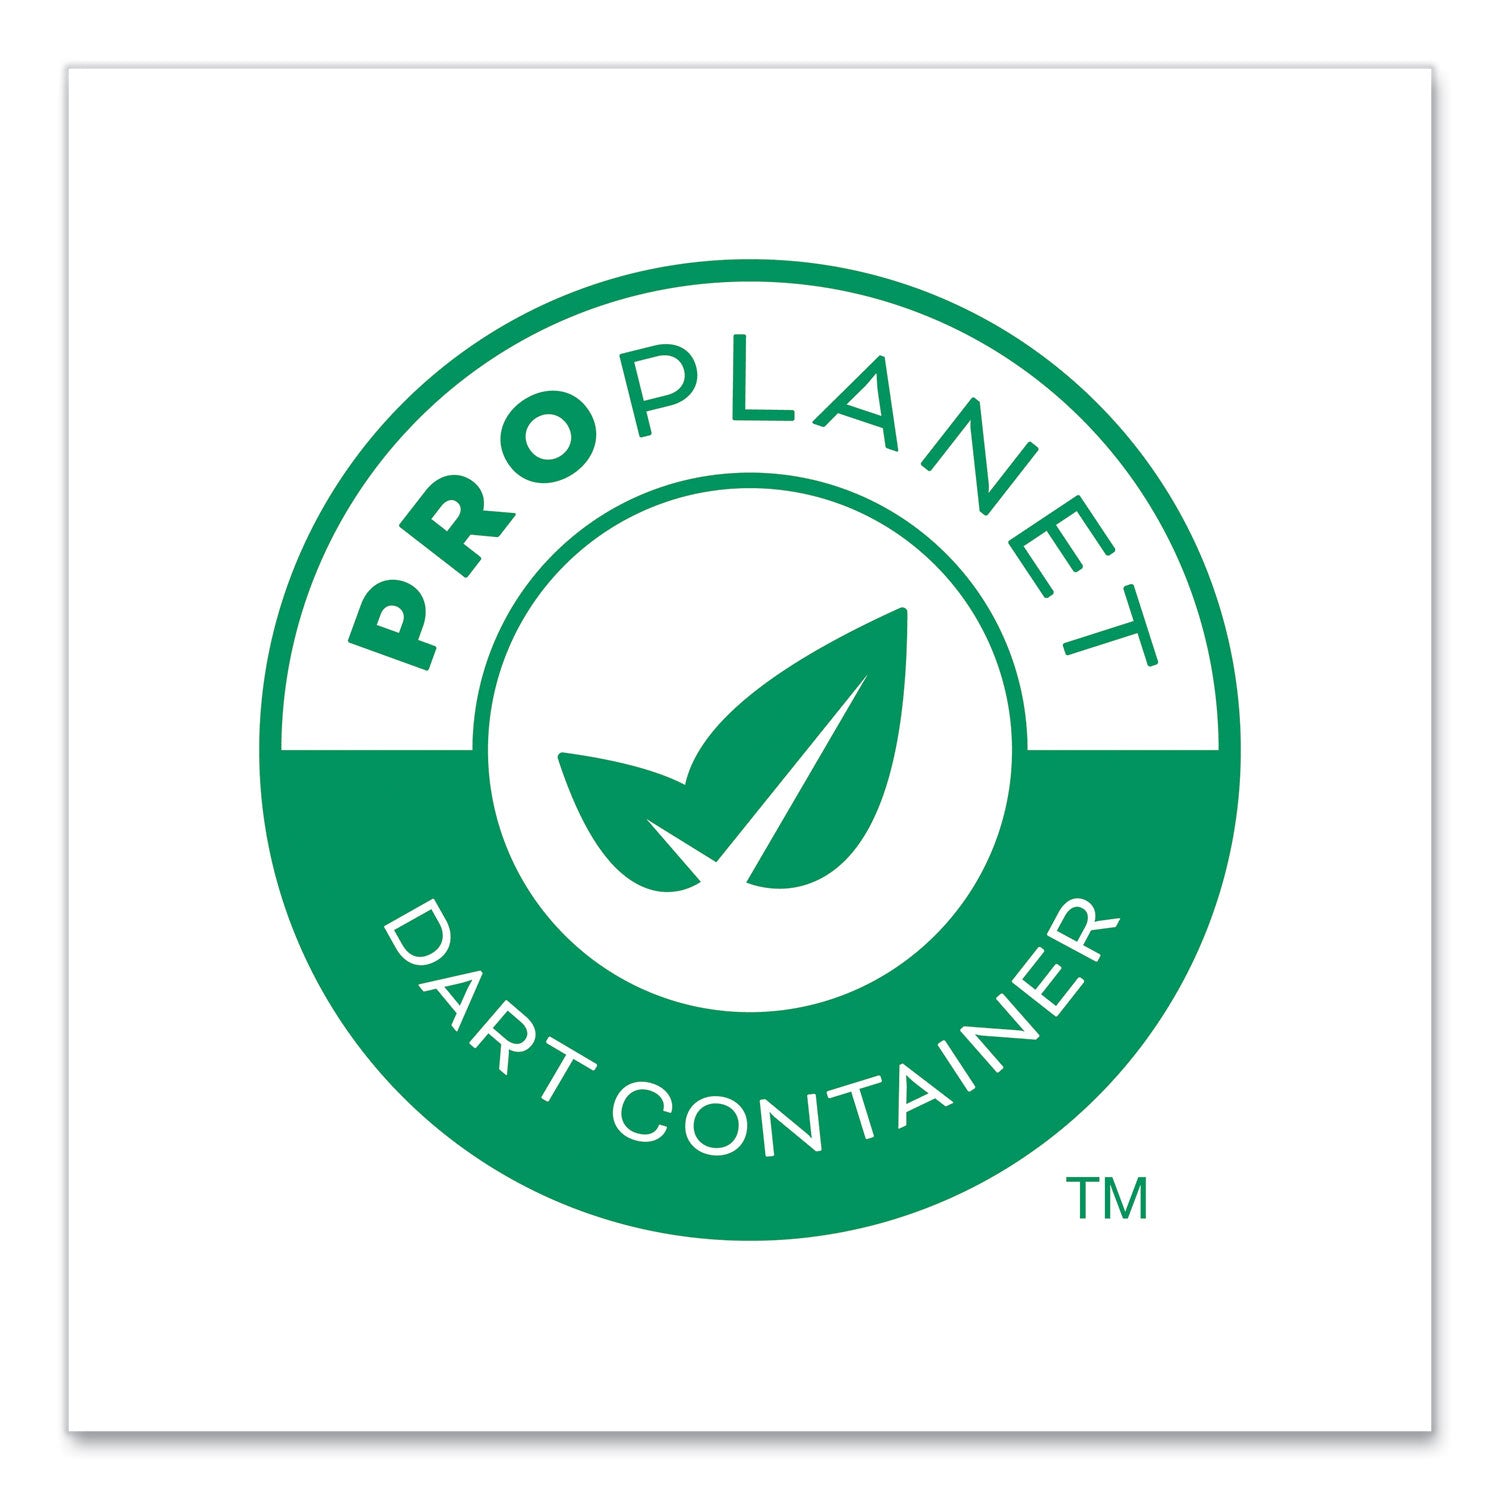 bare-eco-forward-clay-coated-paper-dinnerware-proplanet-seal-plate-85-dia-white-125-pack-4-packs-carton_sccmp9br2054 - 2